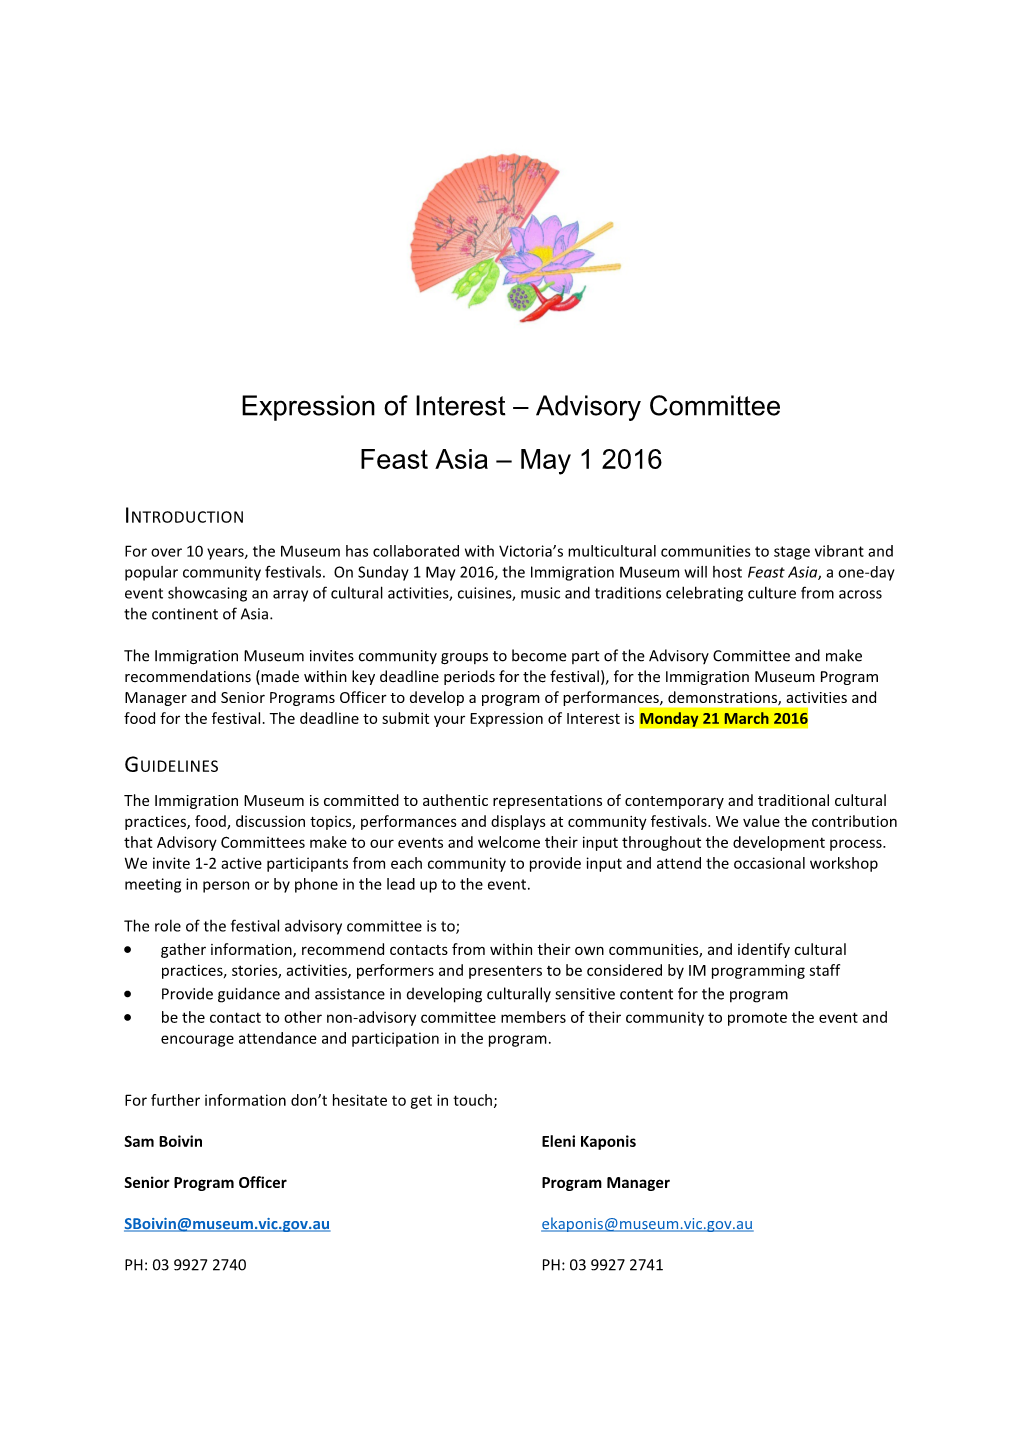 Expression of Interest Advisory Committee